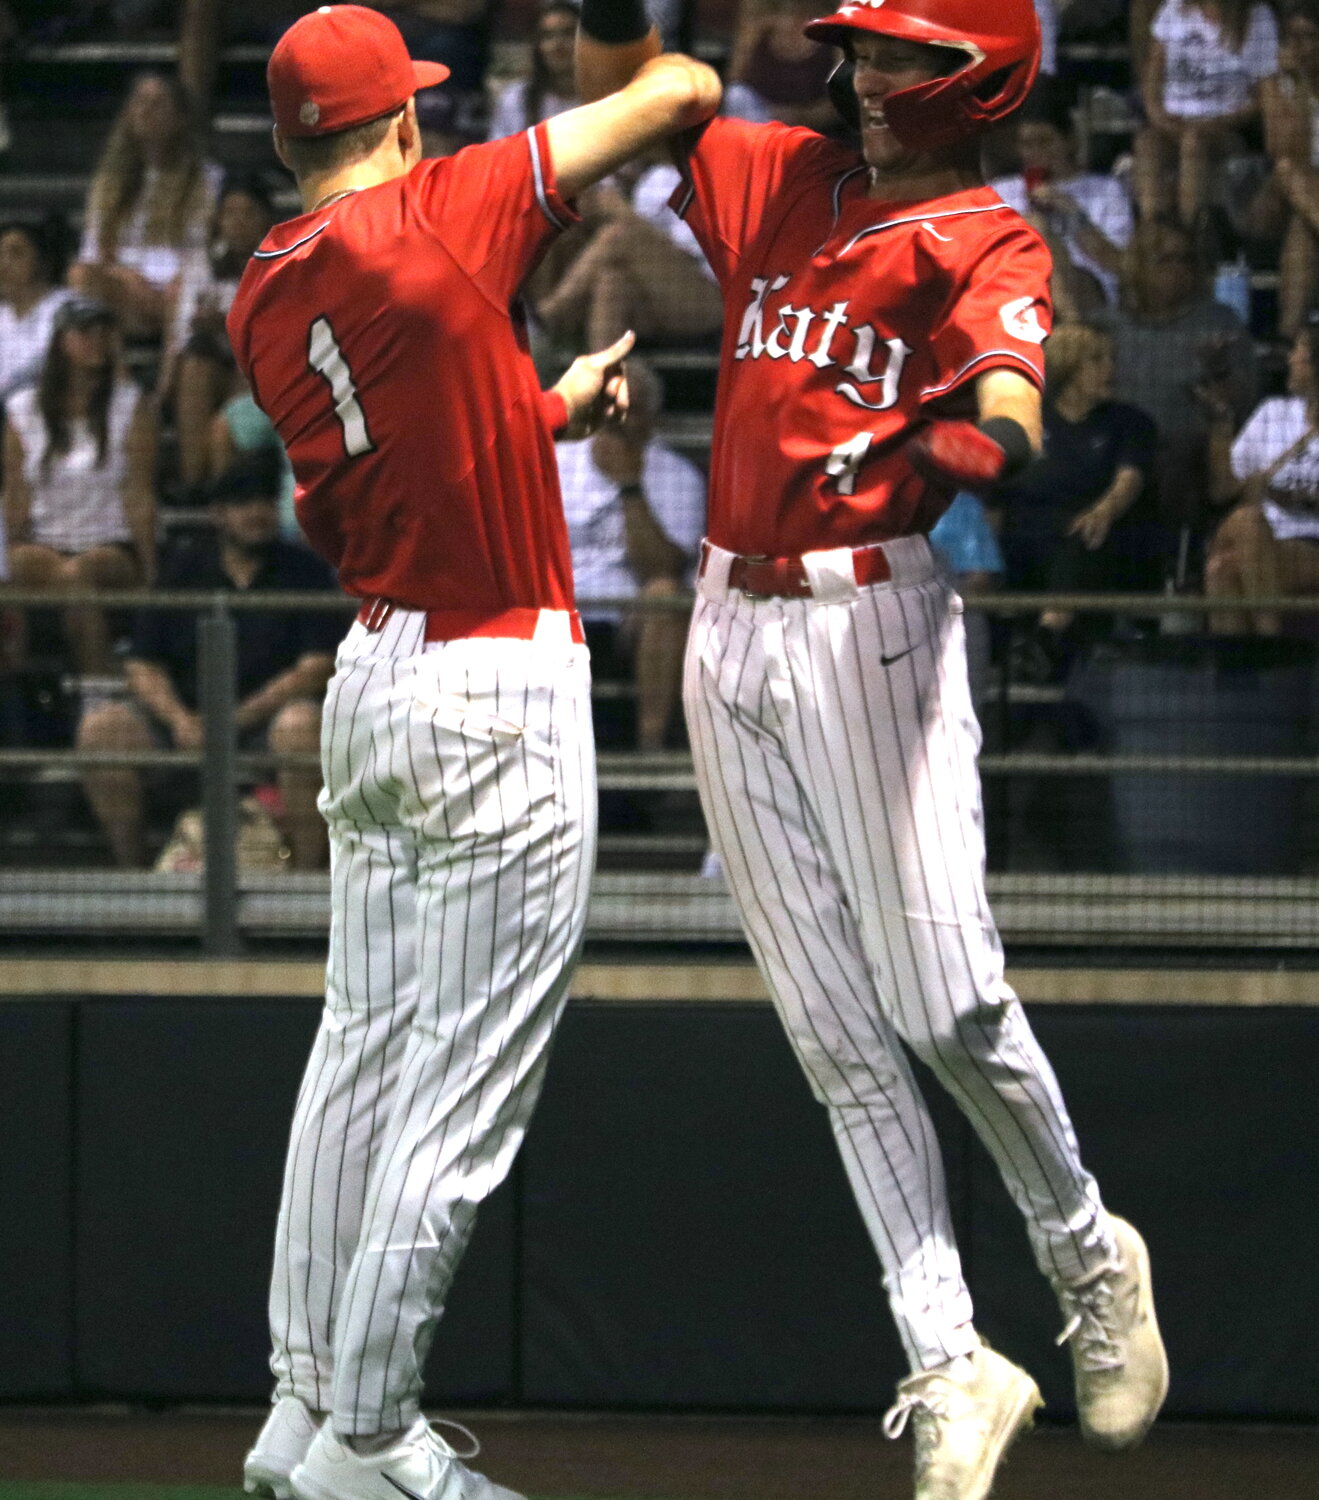 Andrew Hilton and Graham Laxton celebrate after Hilton scored a run during Friday's area round game between Katy and Cy-Fair at Langham Creek.